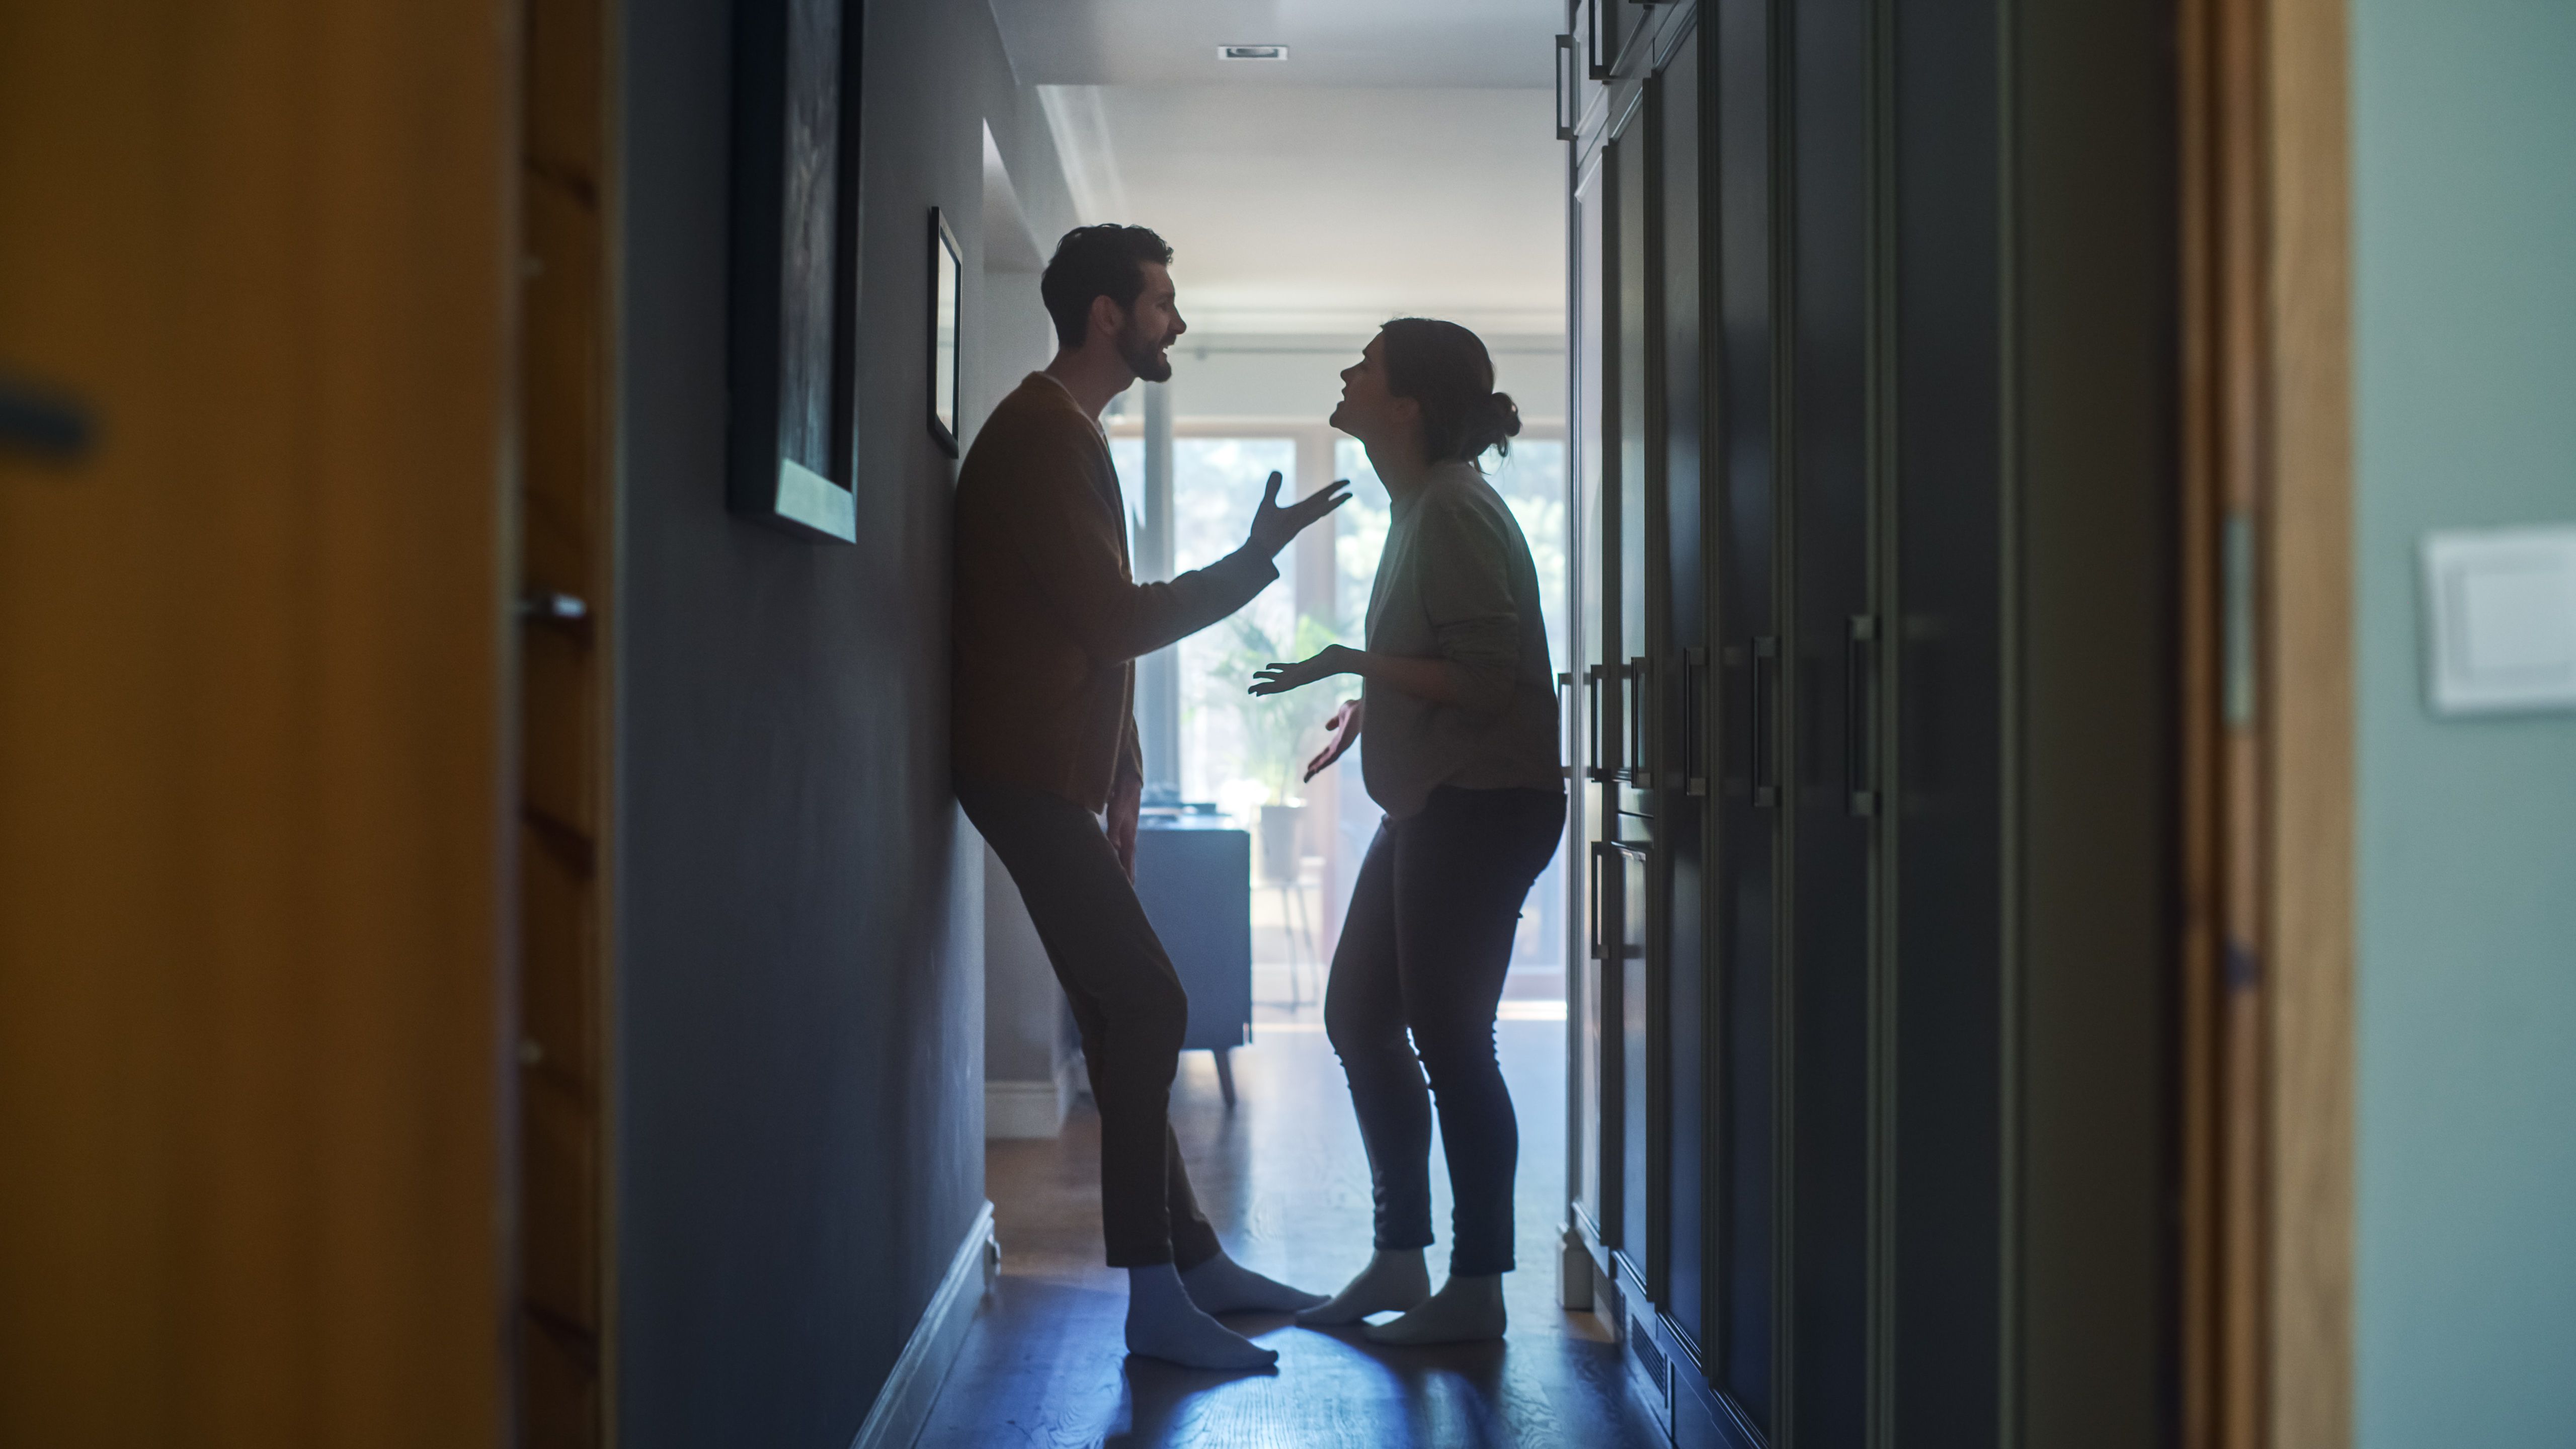 A man and woman fighting at home | Source: Getty Images